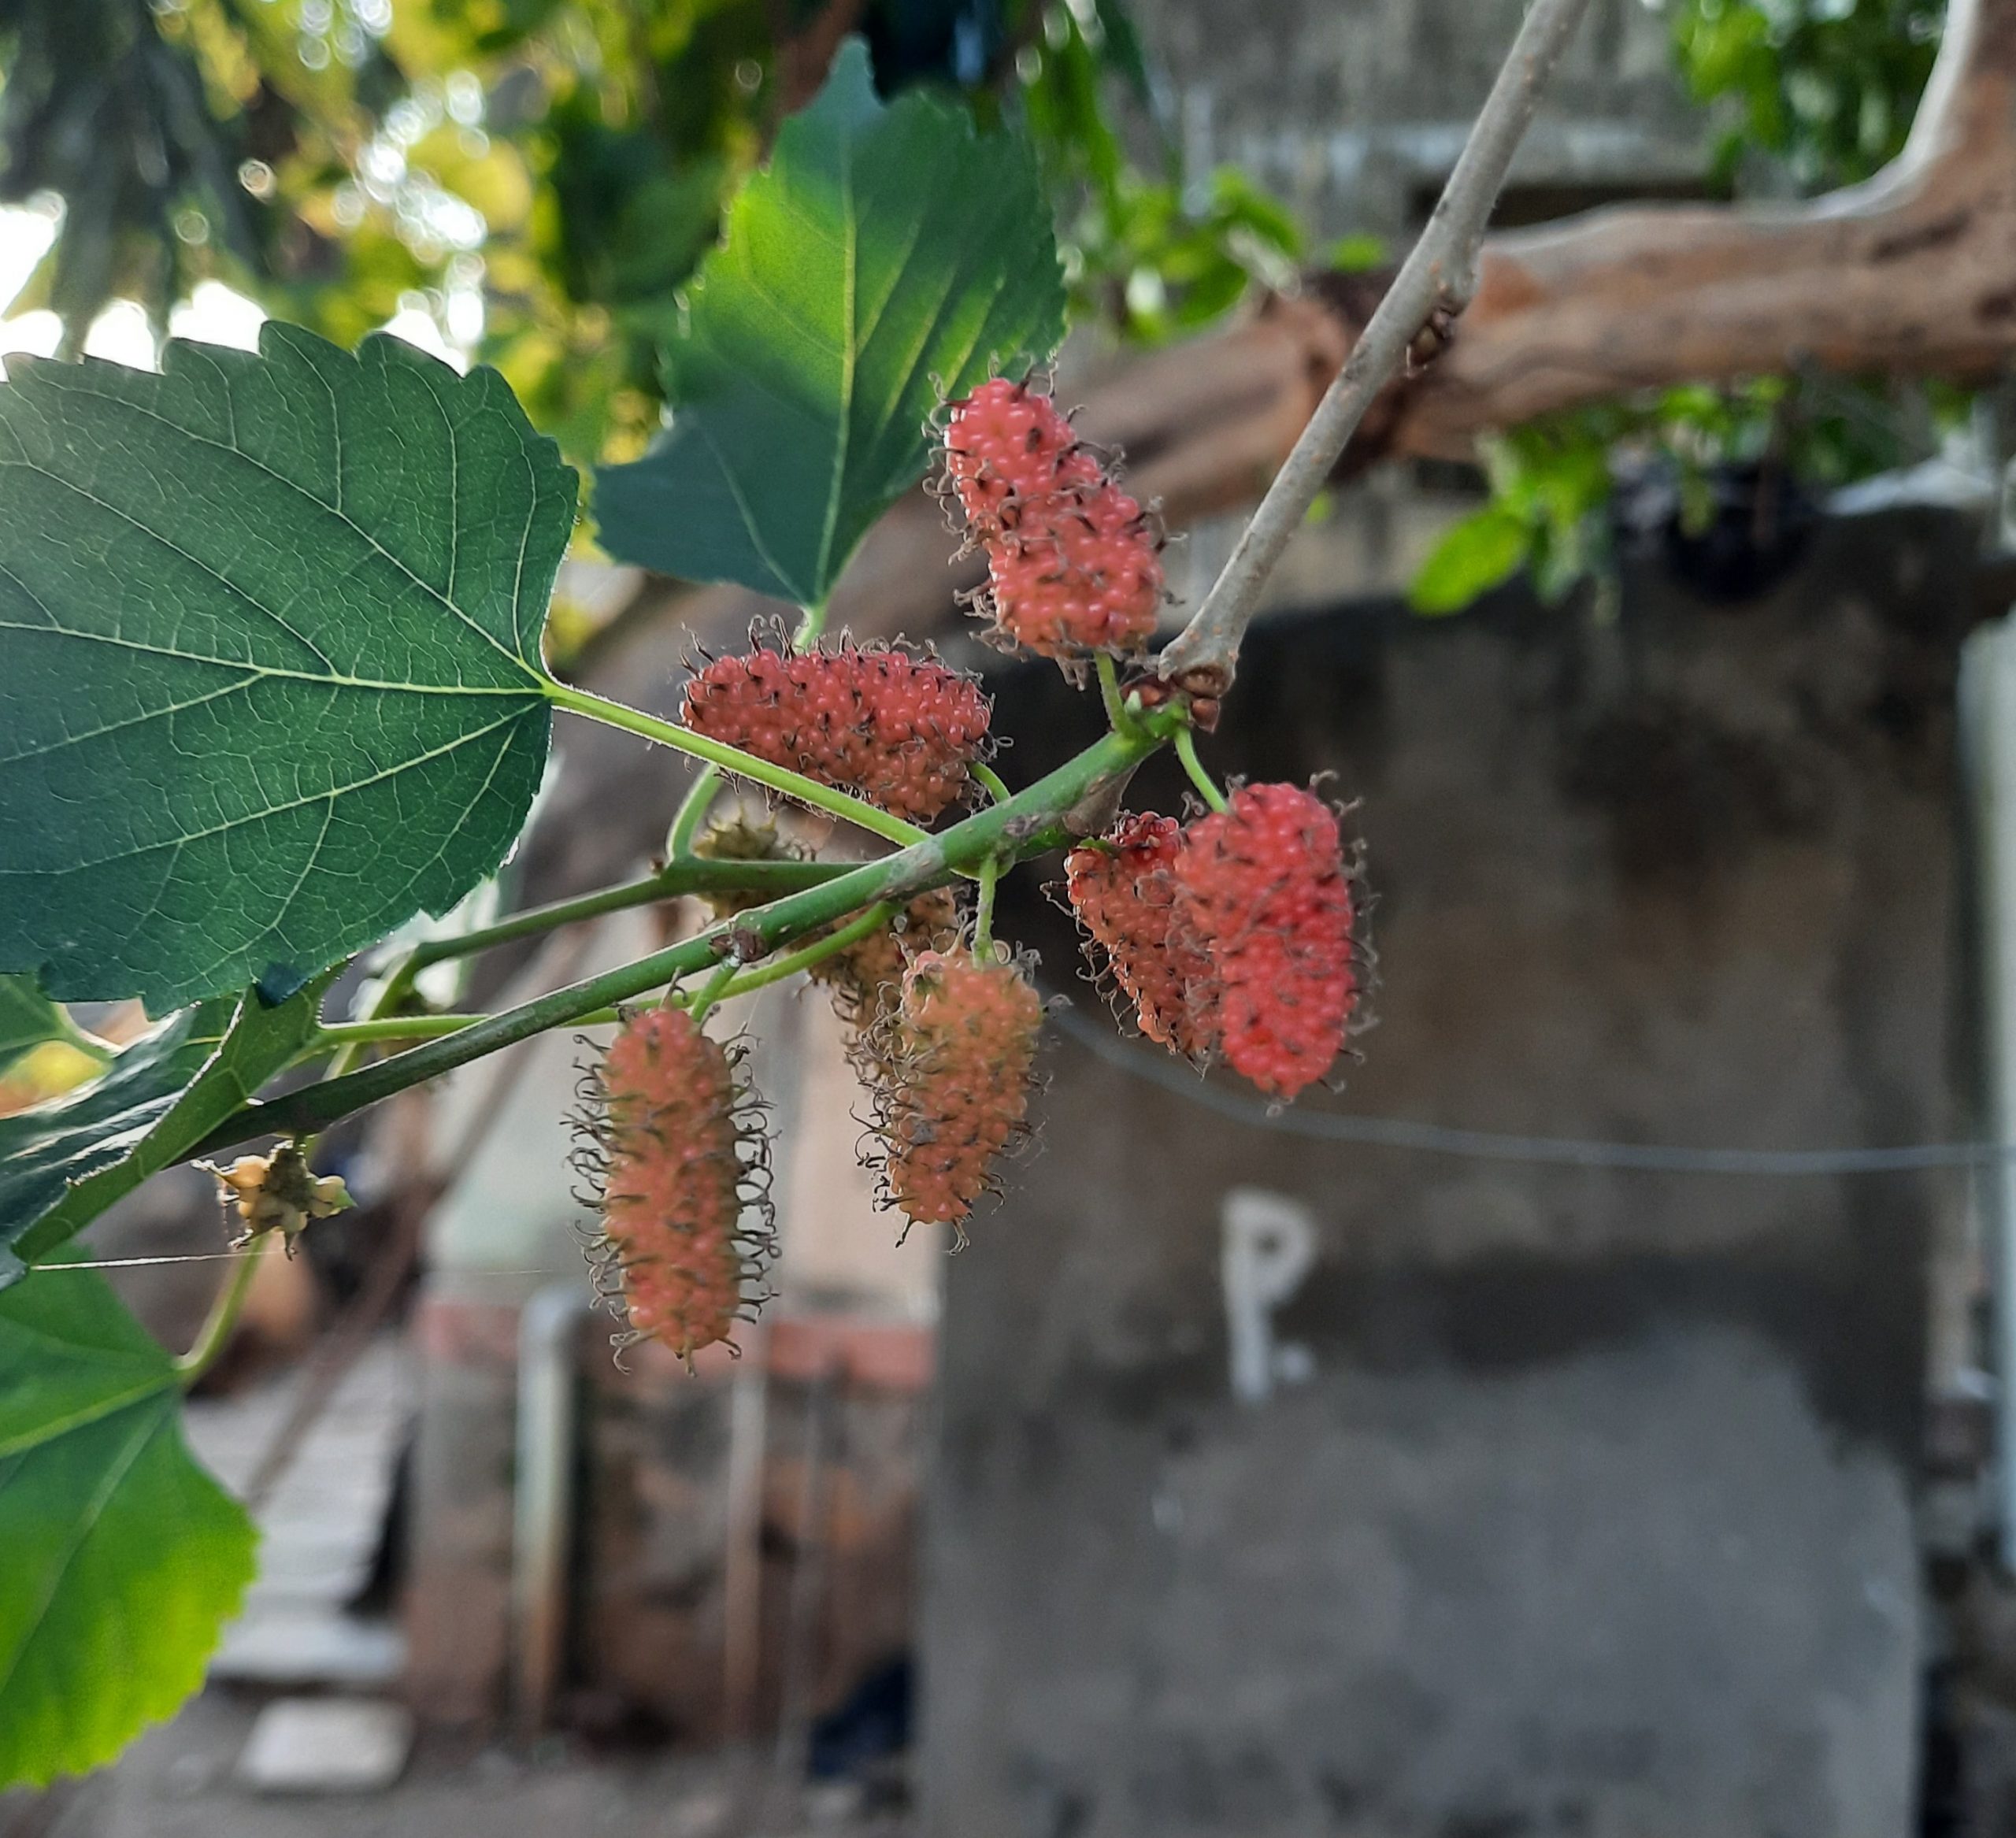 Mulberries on its tree